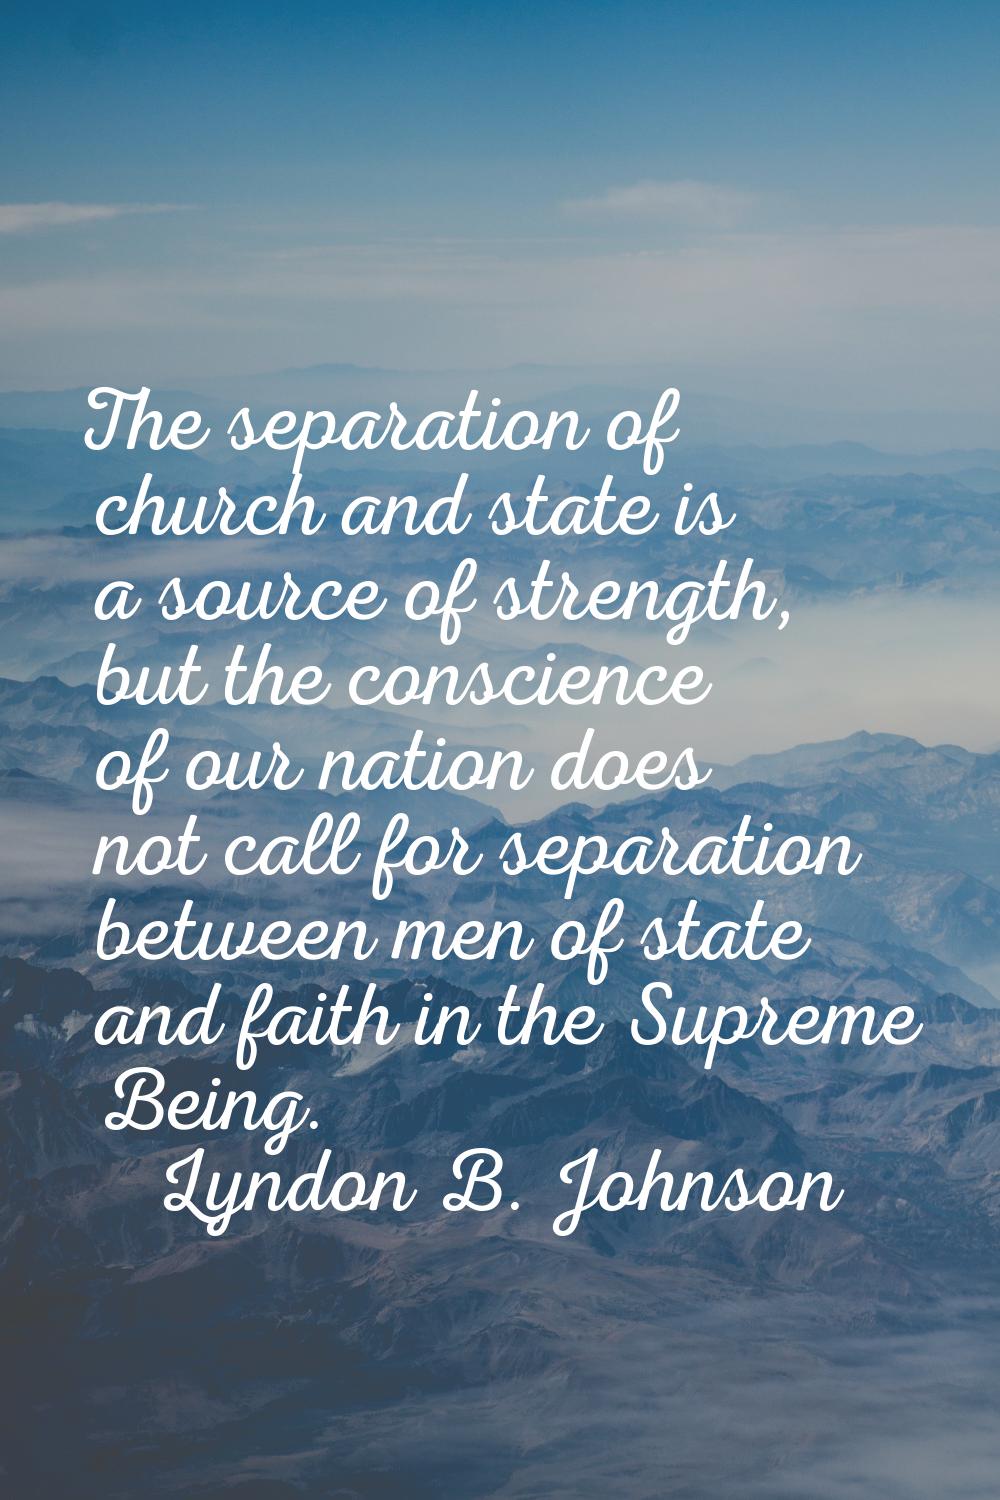 The separation of church and state is a source of strength, but the conscience of our nation does n